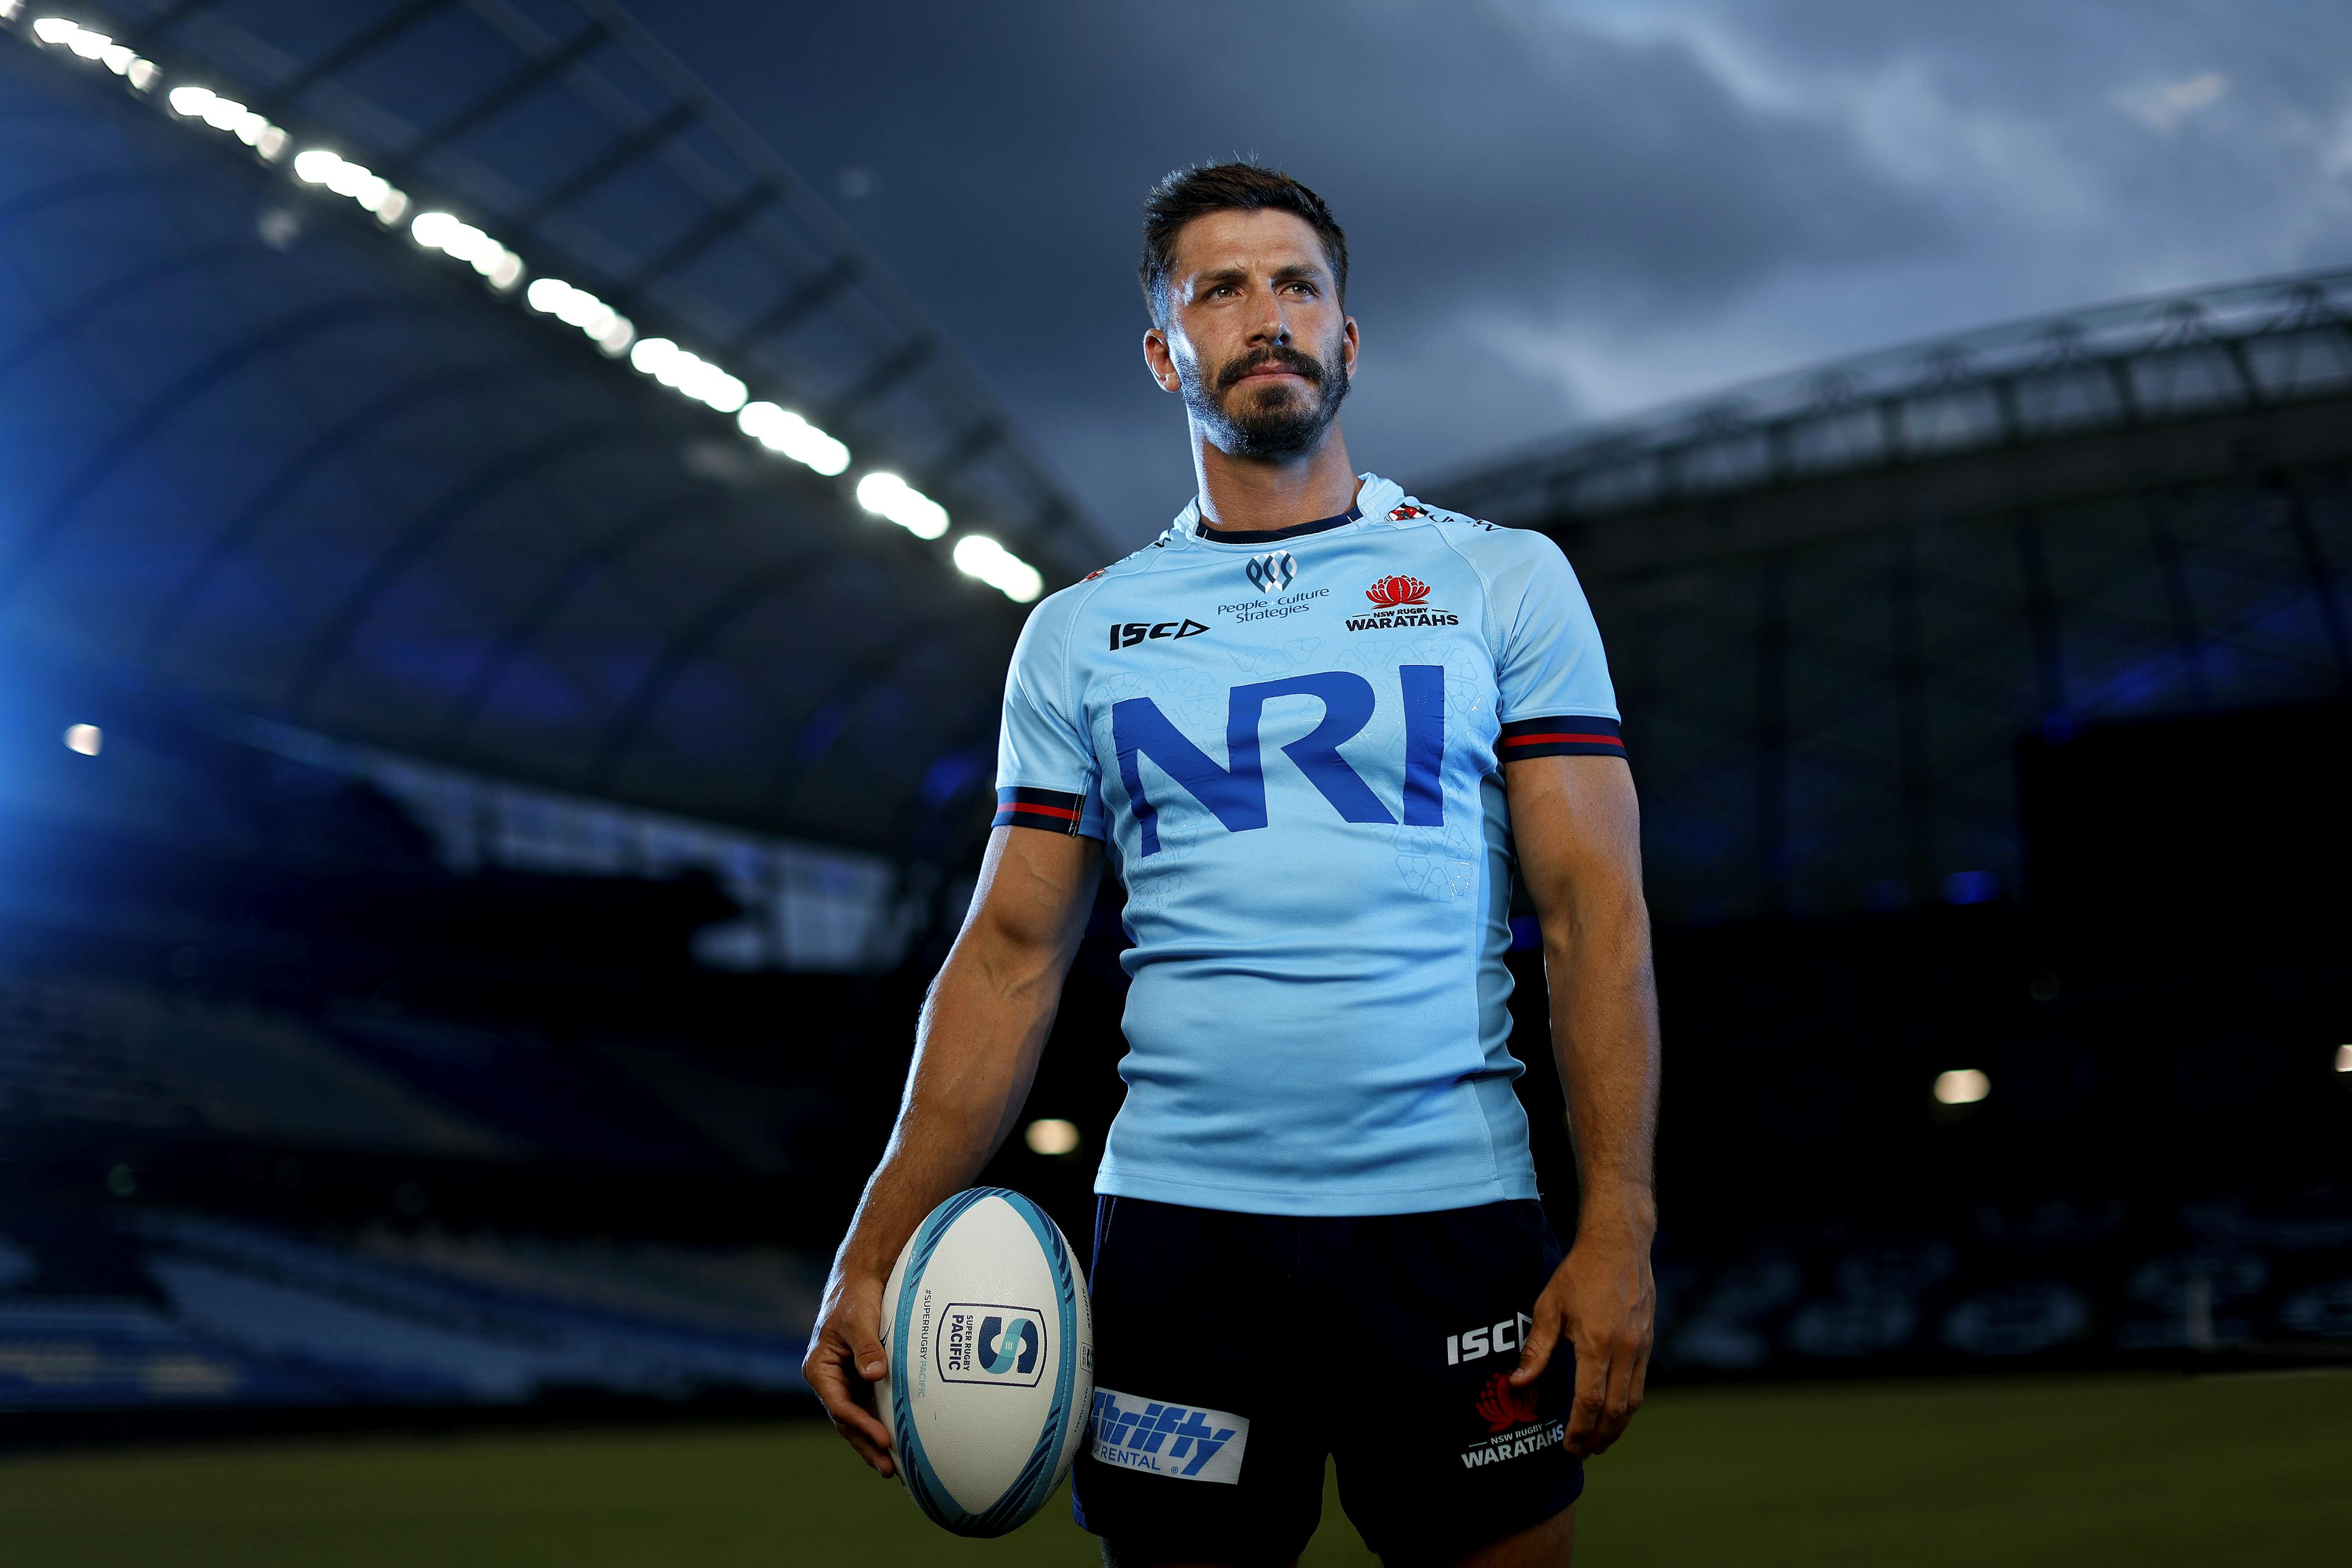 Waratahs Captain Jake Gordon has signed a two year extension